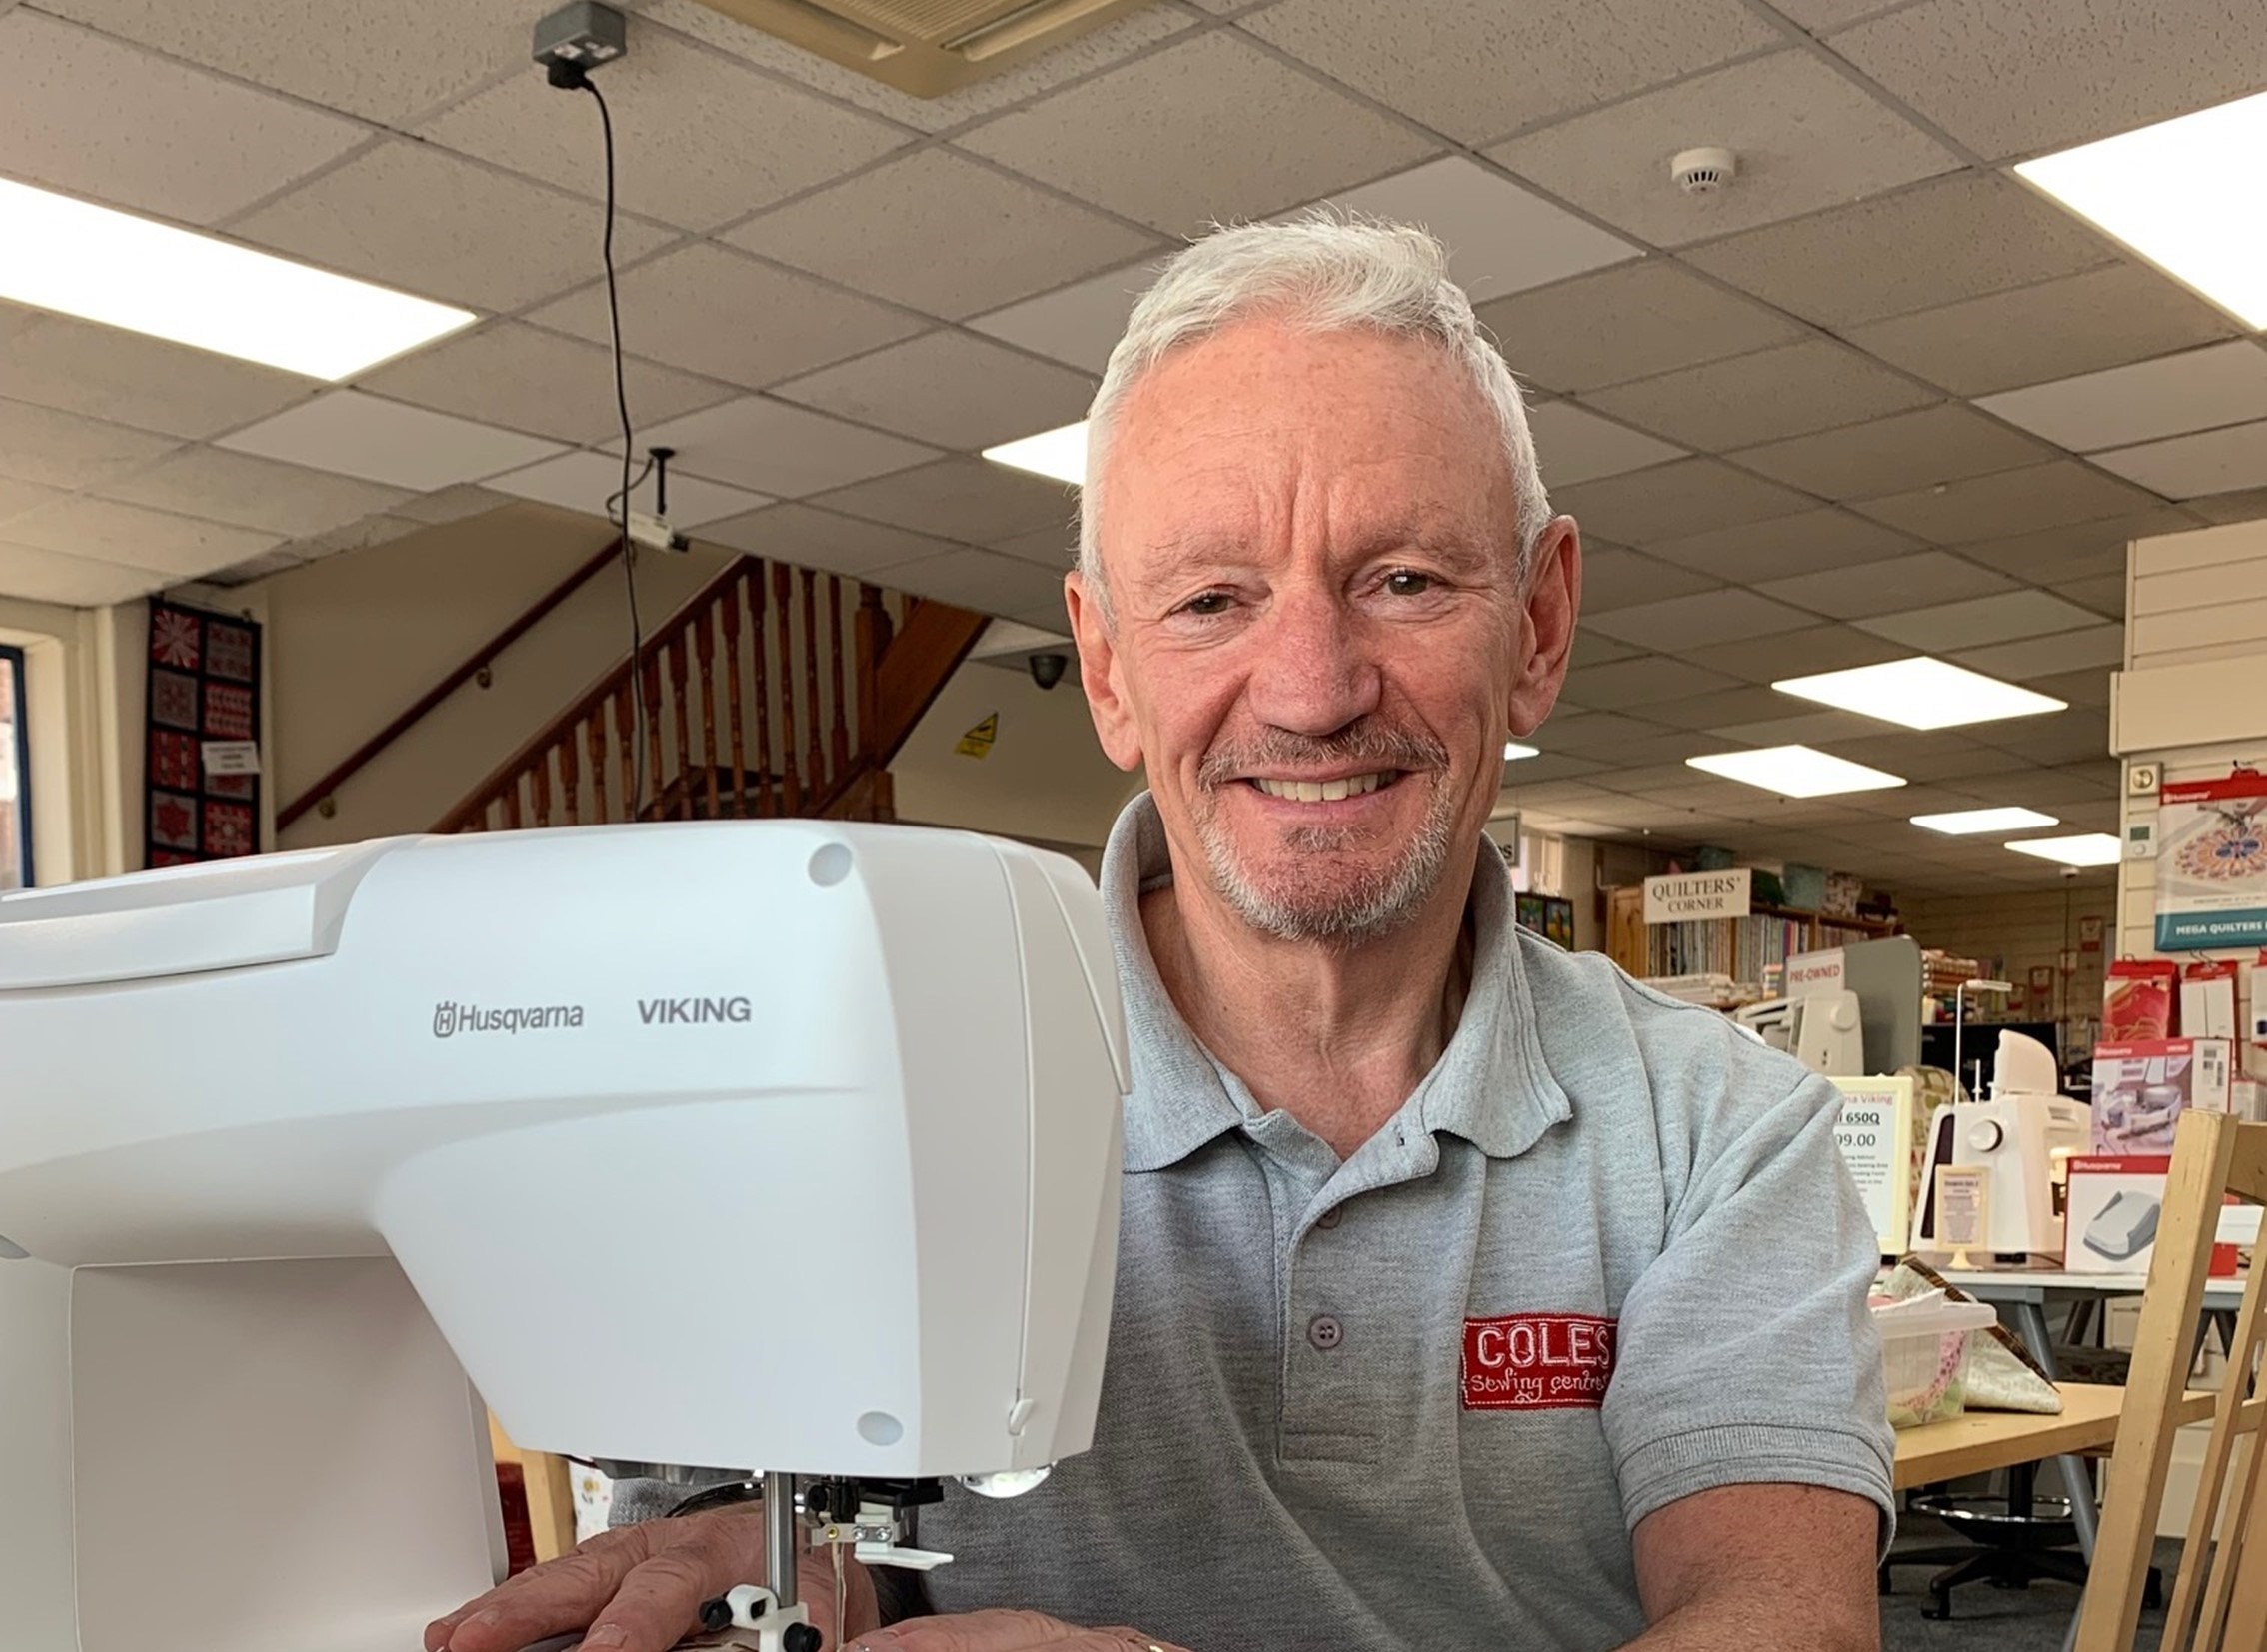 Neil Coles, owner of Coles Sewing Centre, sat behind a sewing machine